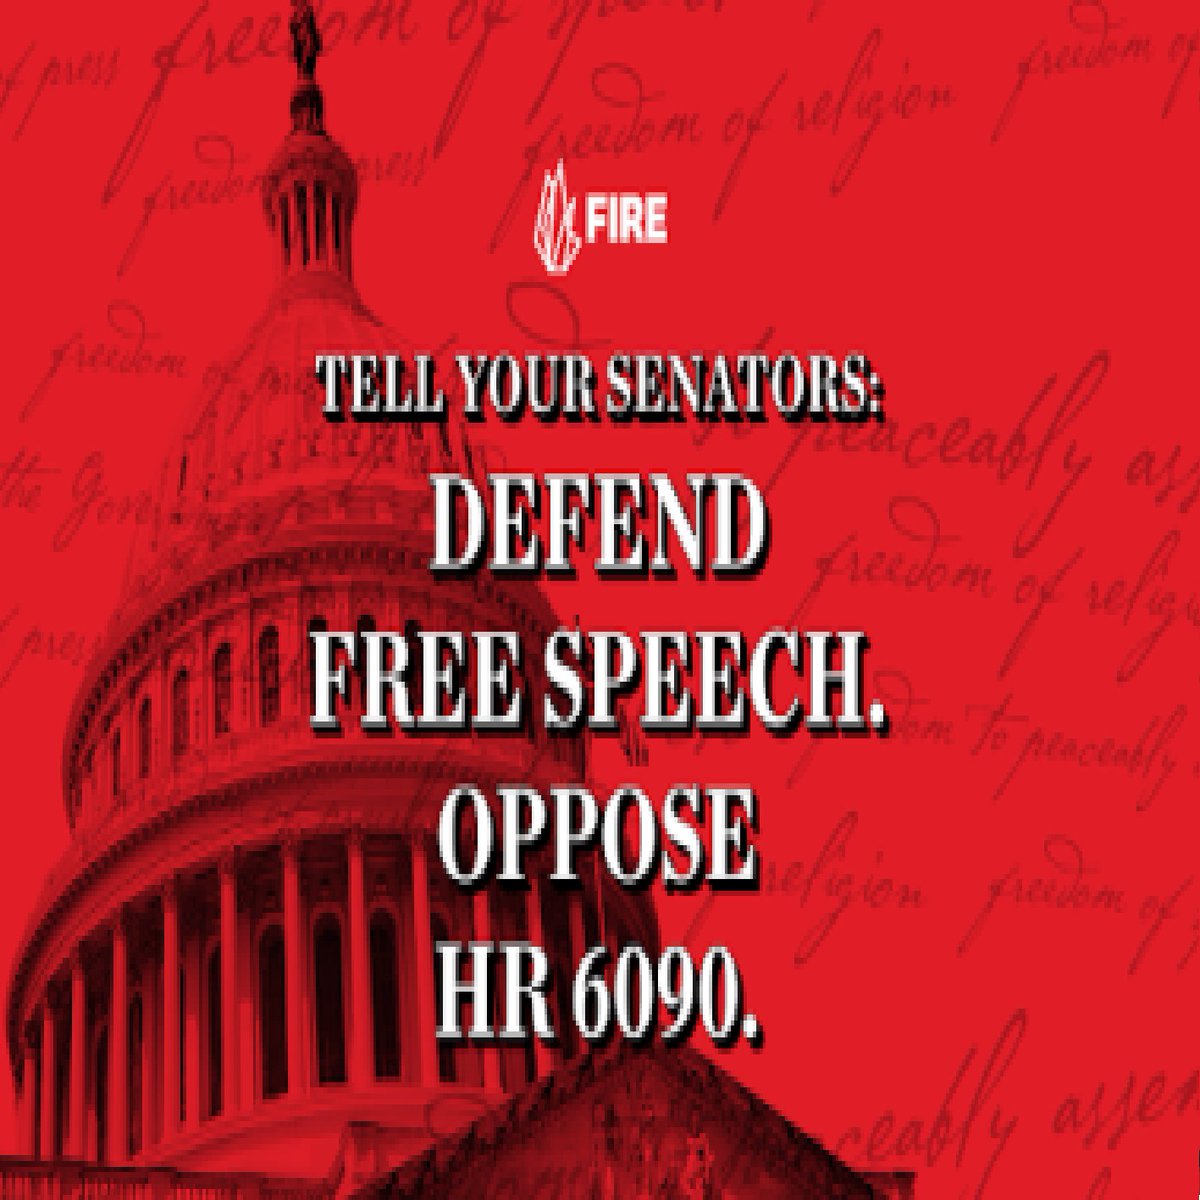 House Resolution Bill 6090 [zurl.co/U0kN] passed by the House of Representatives aims to combat antisemitism, but concerns arise about whether it might infringe on religious freedoms. #HR6090 #Antisemitism #ReligiousFreedom #HateSpeech